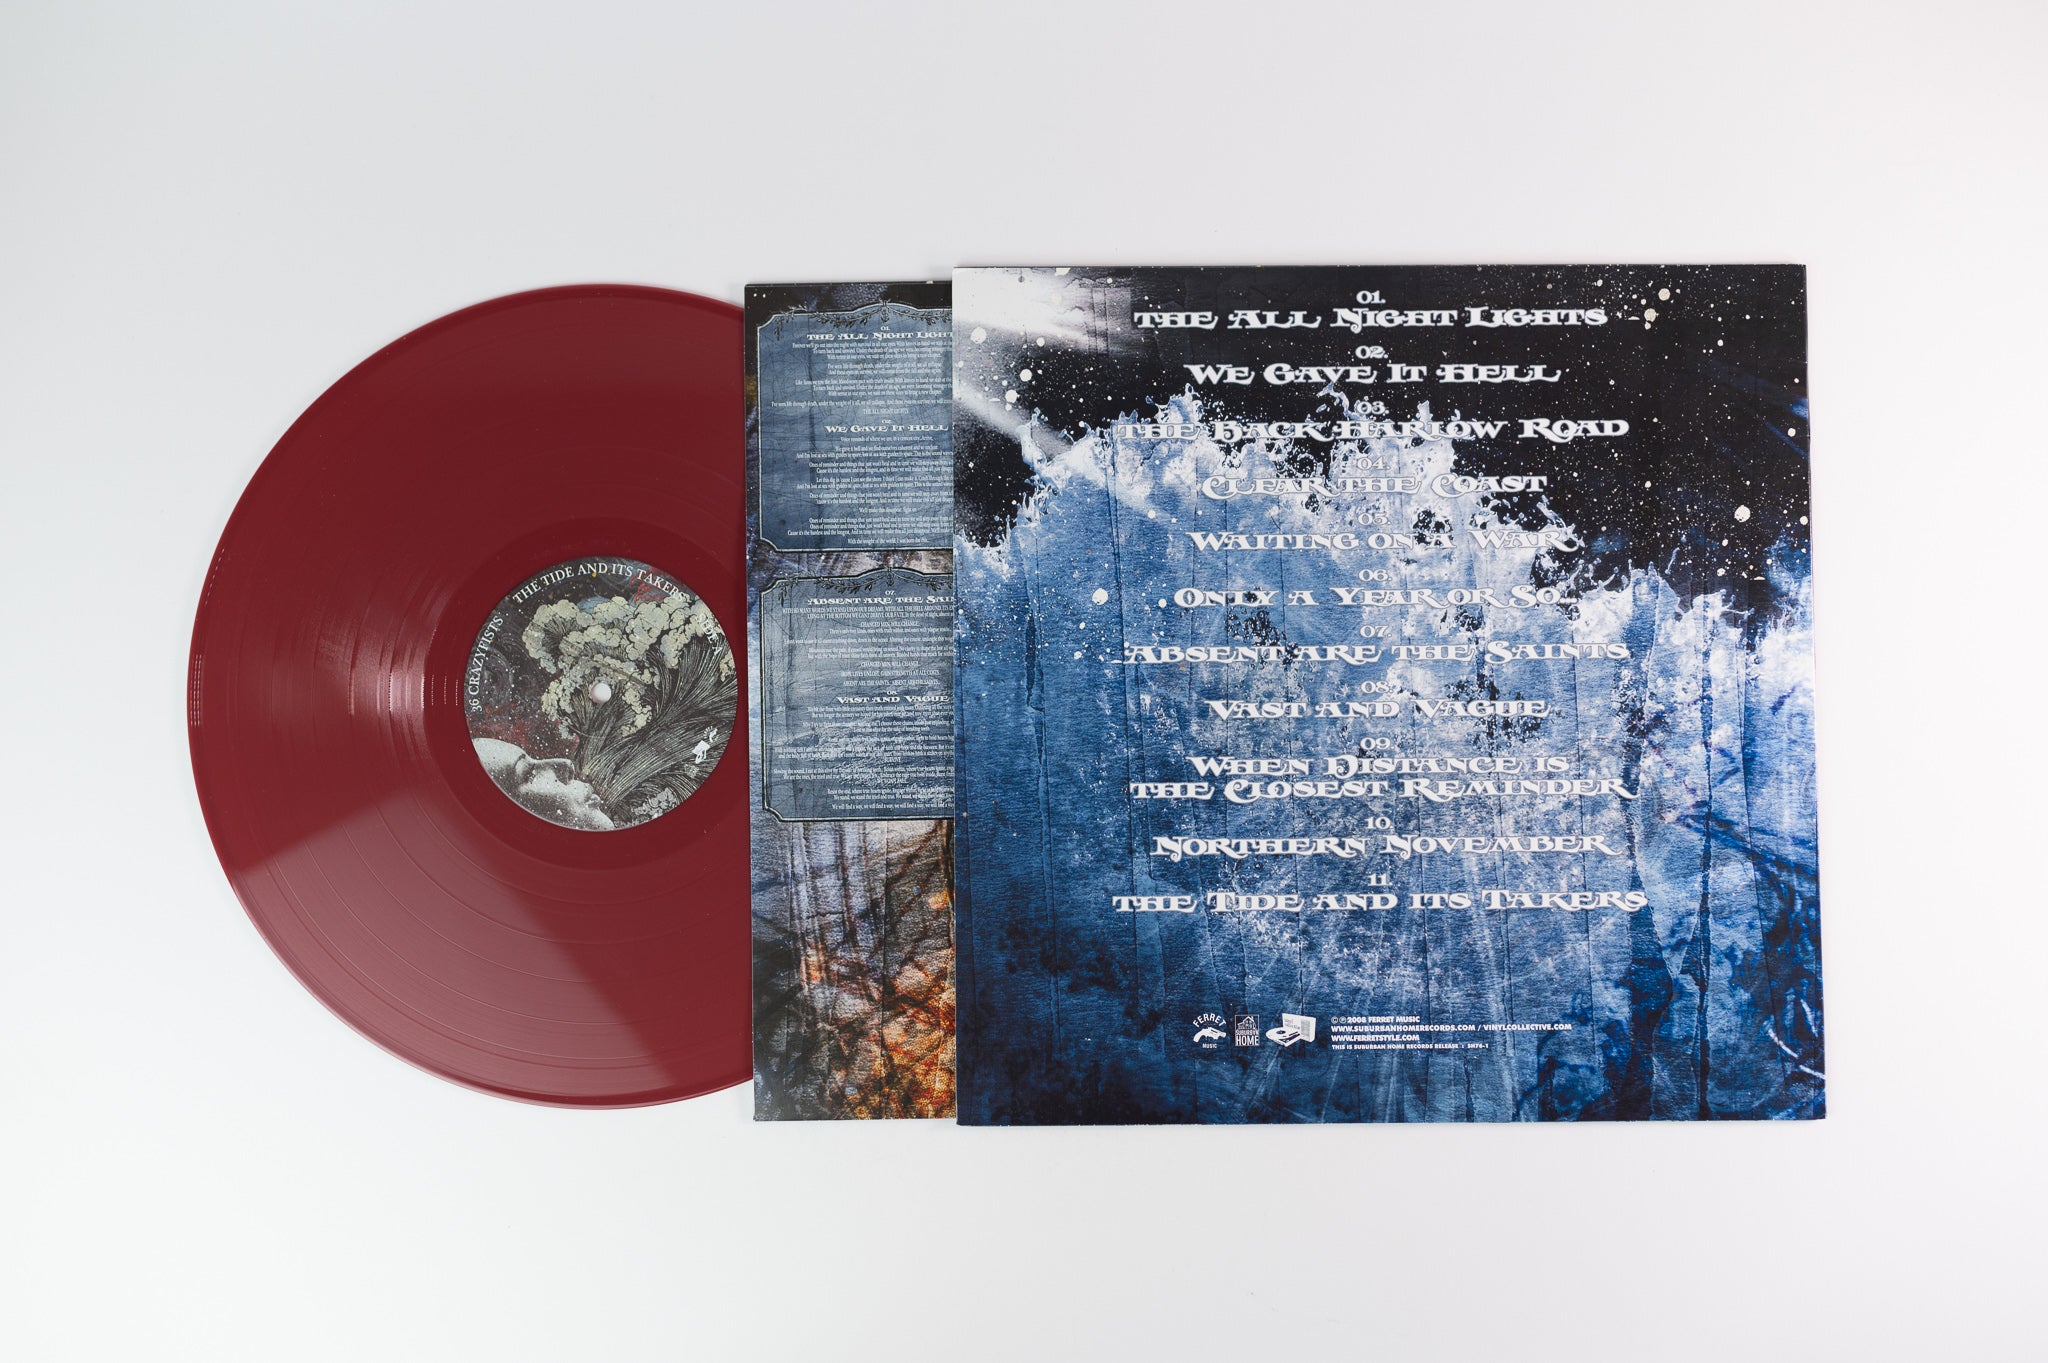 36 Crazyfists - The Tide And Its Takers on Suburban Red Vinyl